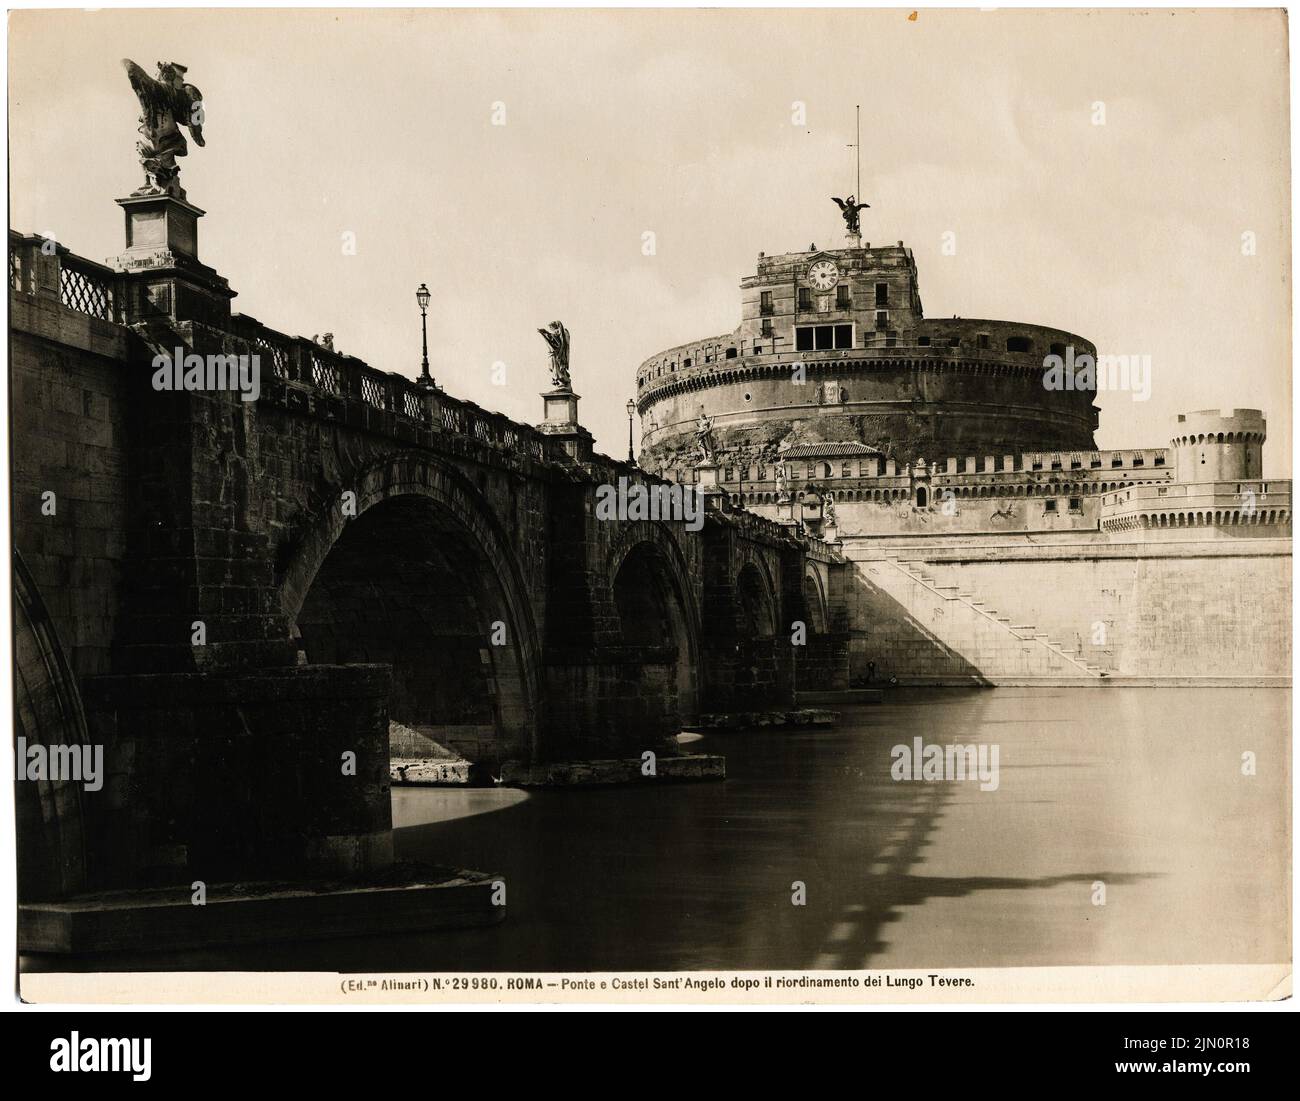 Bernini (1598-1680), Engelsburg (Castel S. Angelo) and Engelsbrücke in Rome (without Dat.): The Ponte S. Angelo with angel figures from the right side over the Tiber. Photo, 20.4 x 26.2 cm (including scan edges) Bernini  (1598-1680): Engelsburg (Castel S. Angelo) und Engelsbrücke in Rom (ohne Dat.) Stock Photo